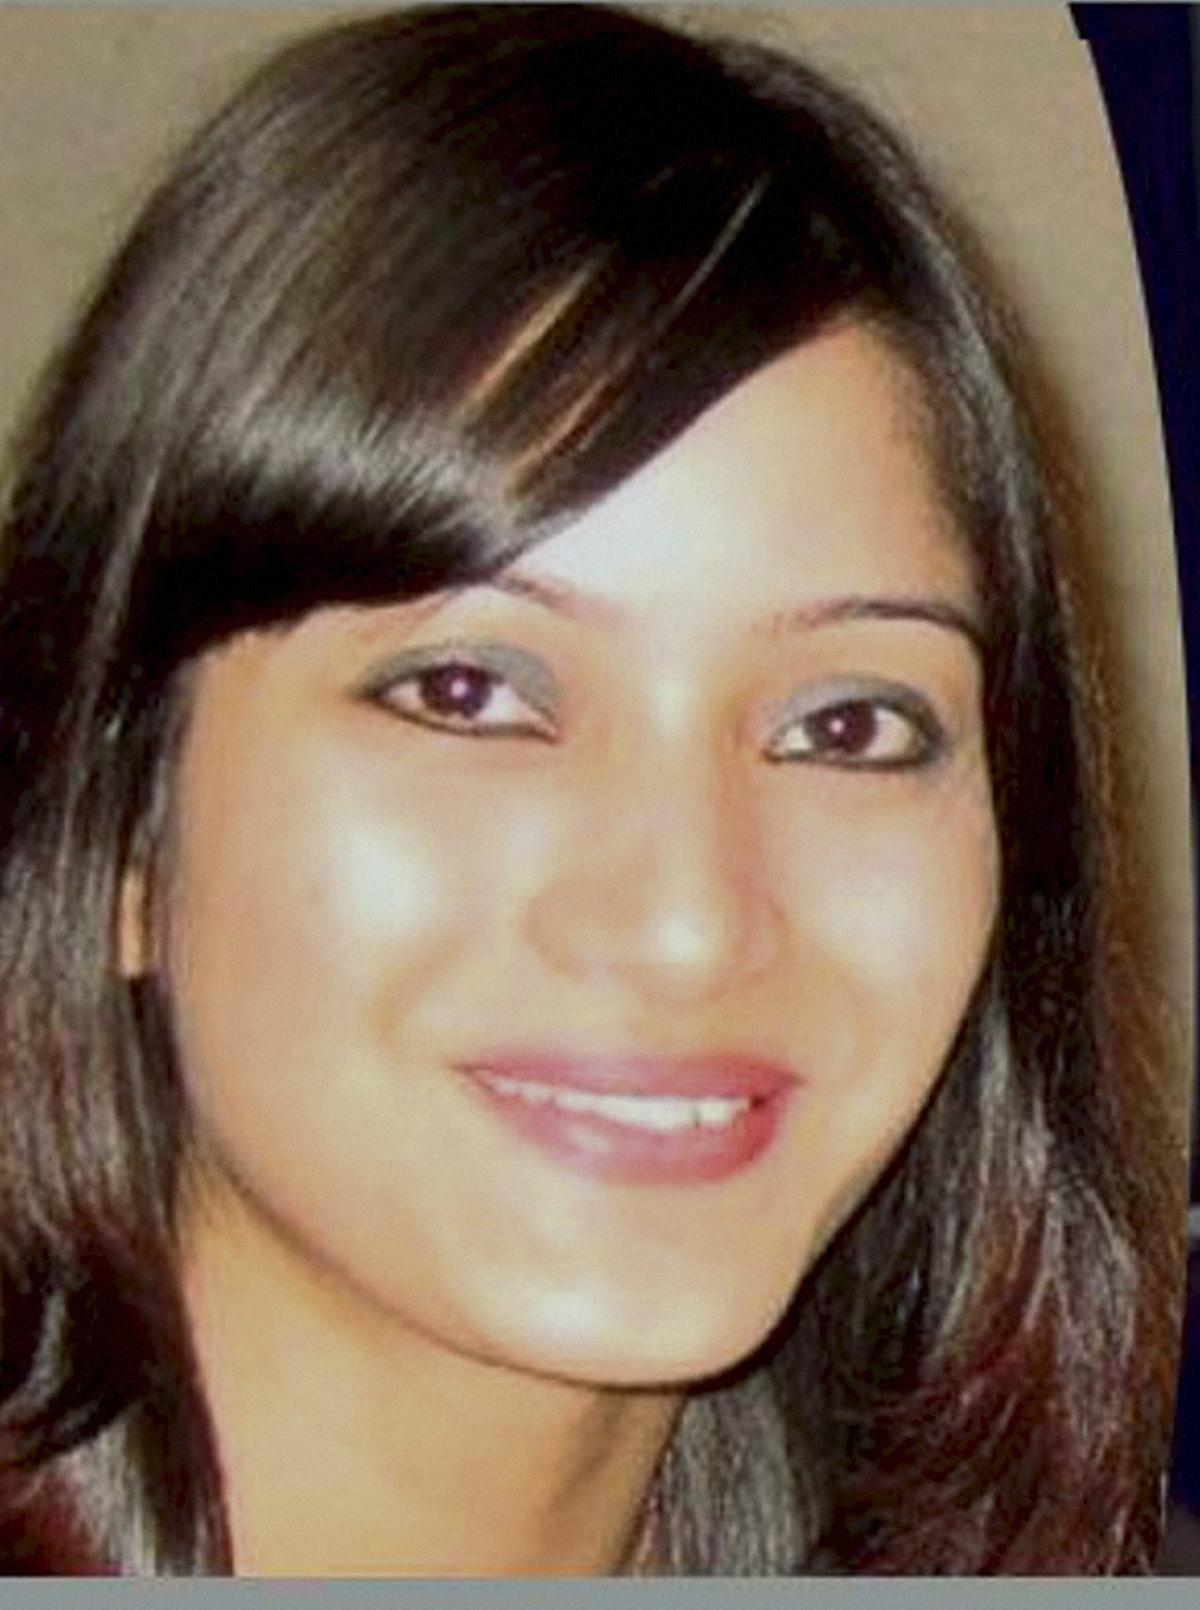 A file photo of Sheena Bora who was allegedly murdered by her mother Indrani Mukerjea in 2012. 